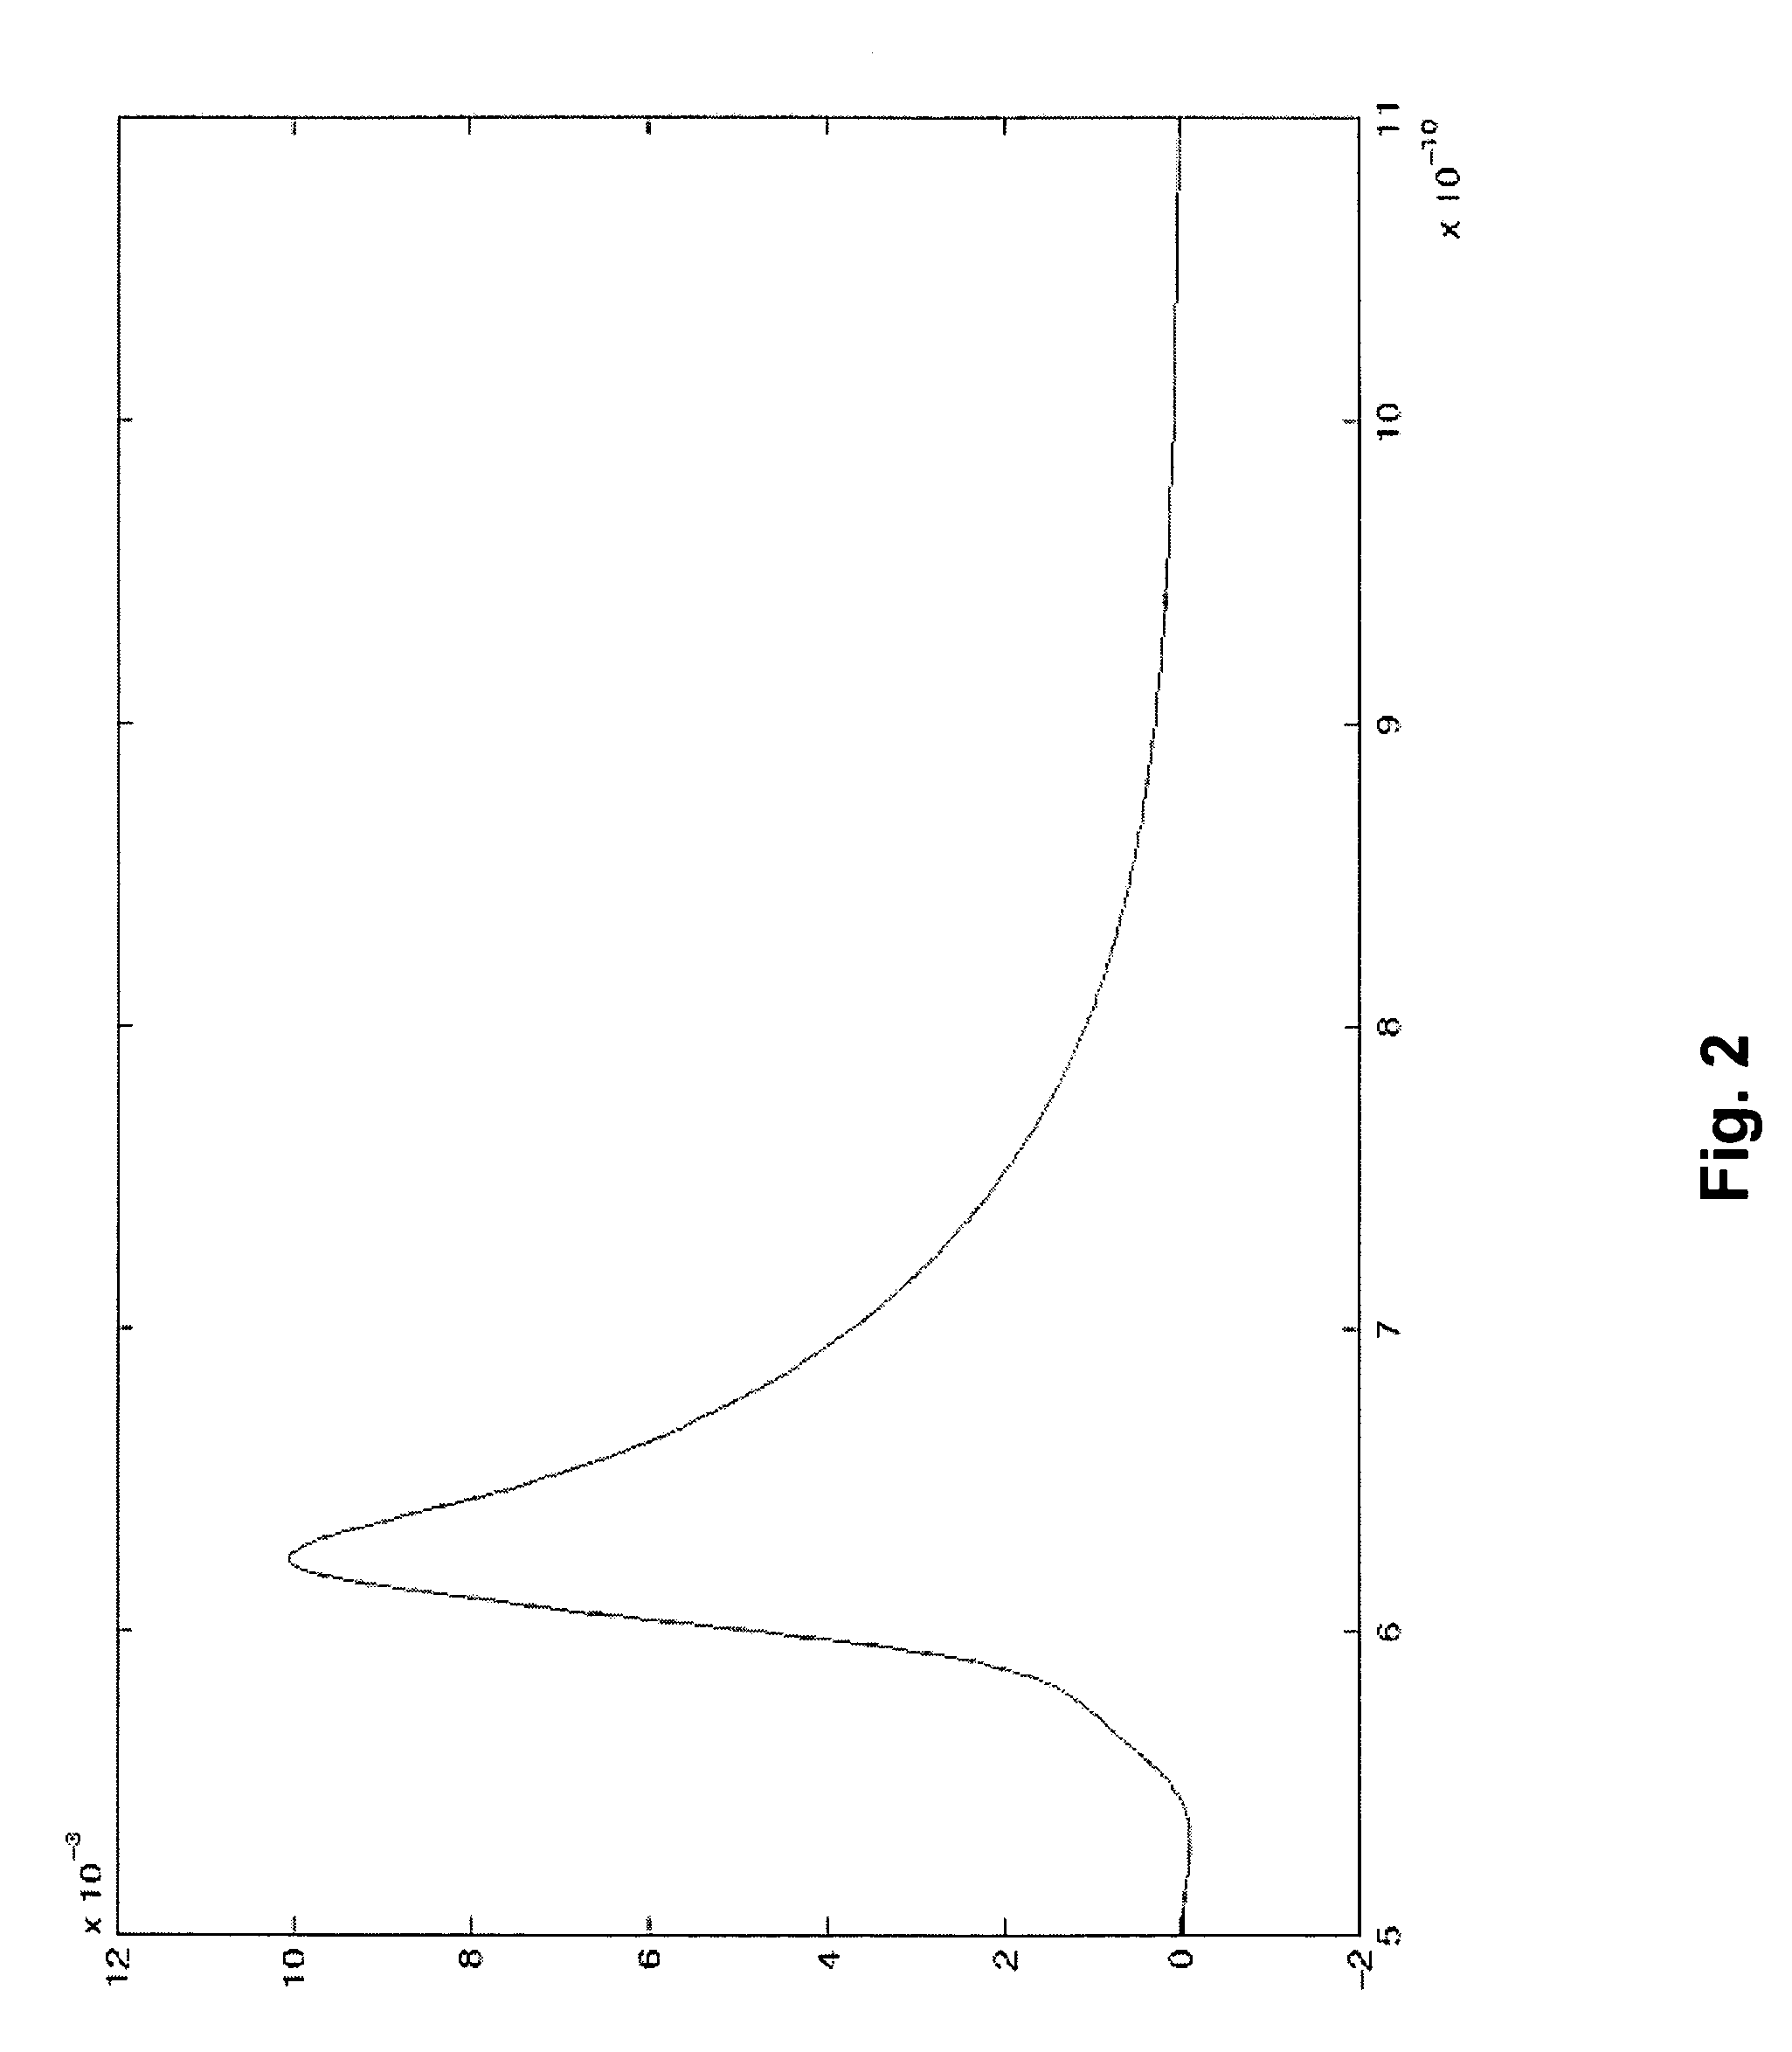 Method and apparatus for power consumption analysis in global nets